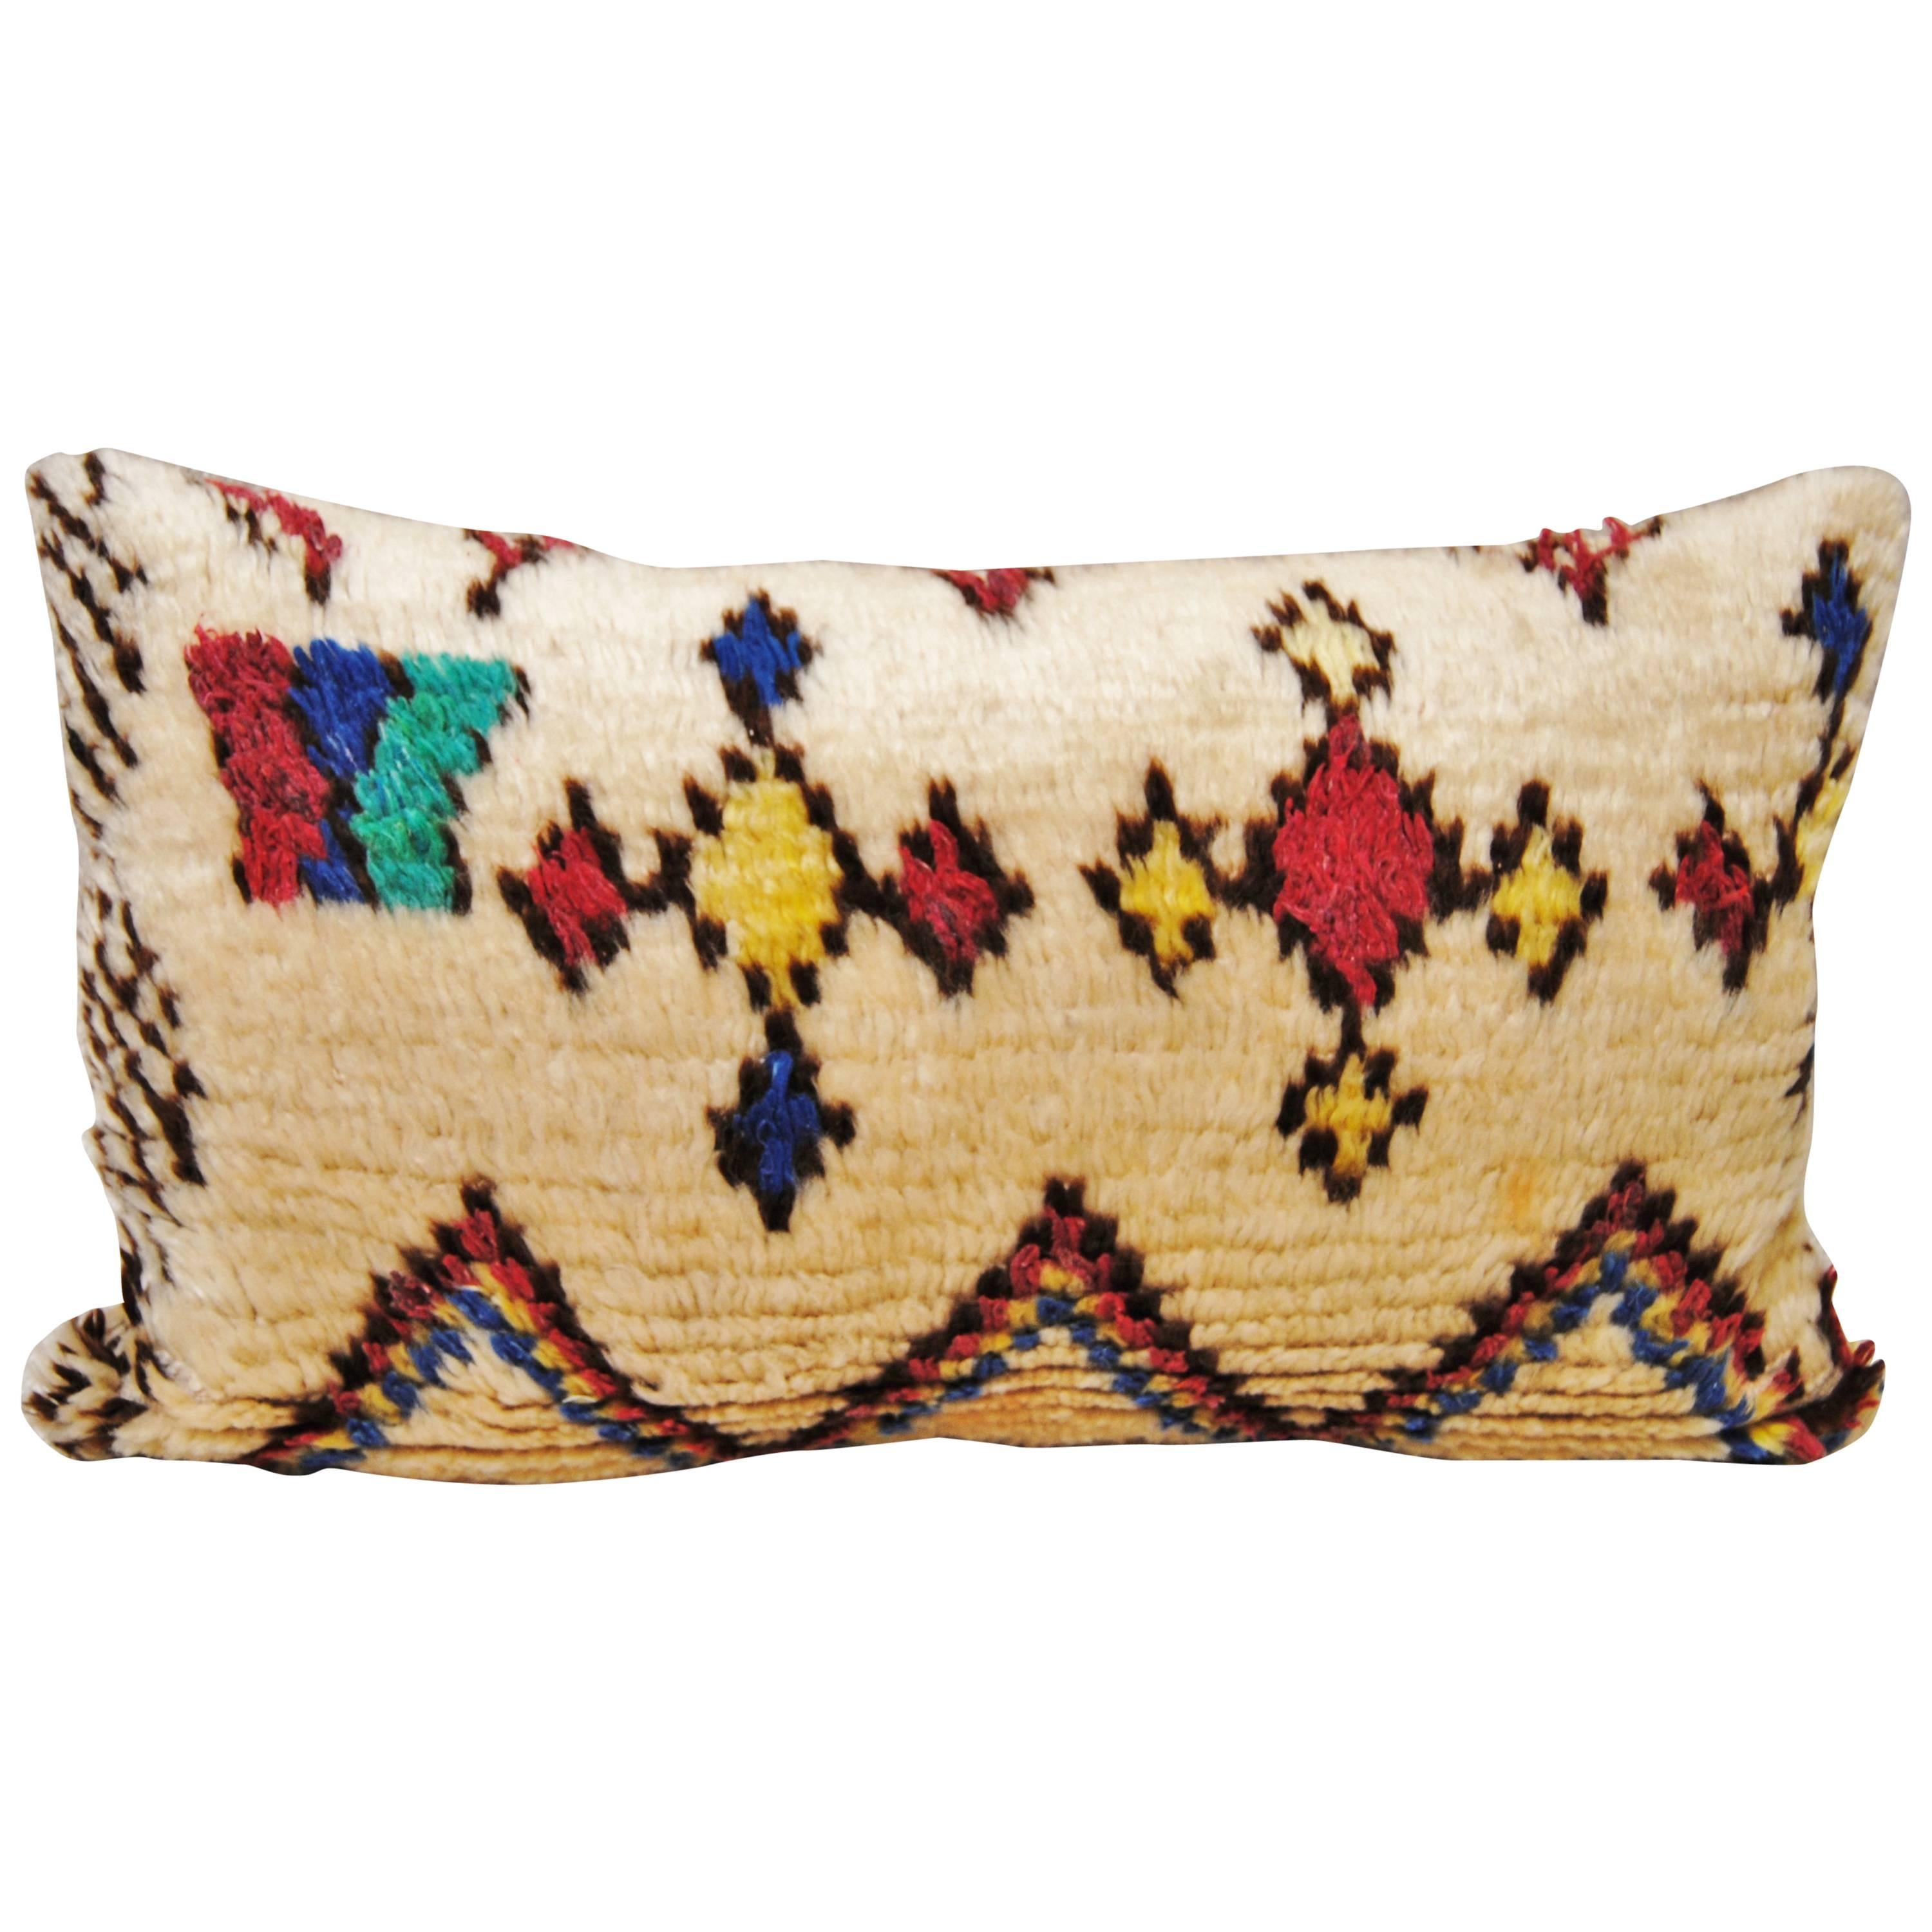 Custom Moroccan Pillow Cut from a Vintage Hand-Loomed Wool Vintage Azilal Rug